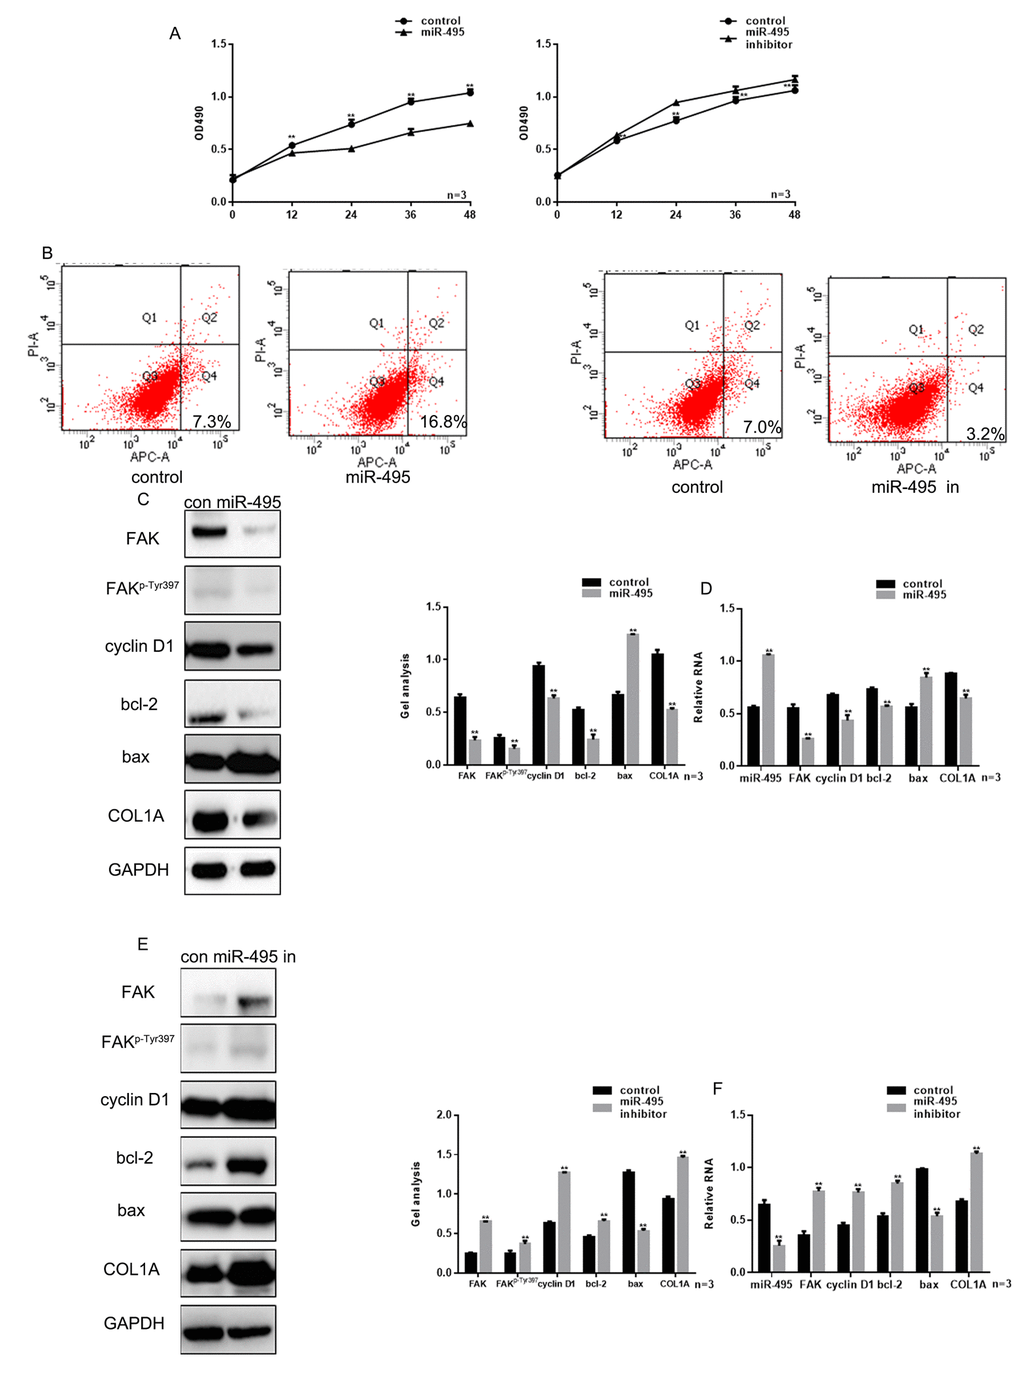 miR-495 inhibits HSF growth. (A) MTT assay showing that following transfection with miR-495 mimic/inhibitor, HSF proliferation is repressed/enhanced. Data are presented as the mean ± SEM. ** PB) AV-PI assay showing that following transfection with miR-495 mimic/inhibitor, HSF apoptosis is enhanced/repressed. (C, D) Following transfection of HSFs with miR-495 mimic, expression of FAK, FAKp-Tyr397, cyclin D1, bcl-2, bax and COL1A were detected using western blotting and real-time PCR. Data are presented as the mean ± SEM. ** PE, F) Following downregulation of miR-495, expressions of FAK, FAKp-Tyr397, cyclin D1, bcl-2, bax and COL1A were detected using western blotting and real-time PCR. Data are presented as the mean ± SEM. ** P